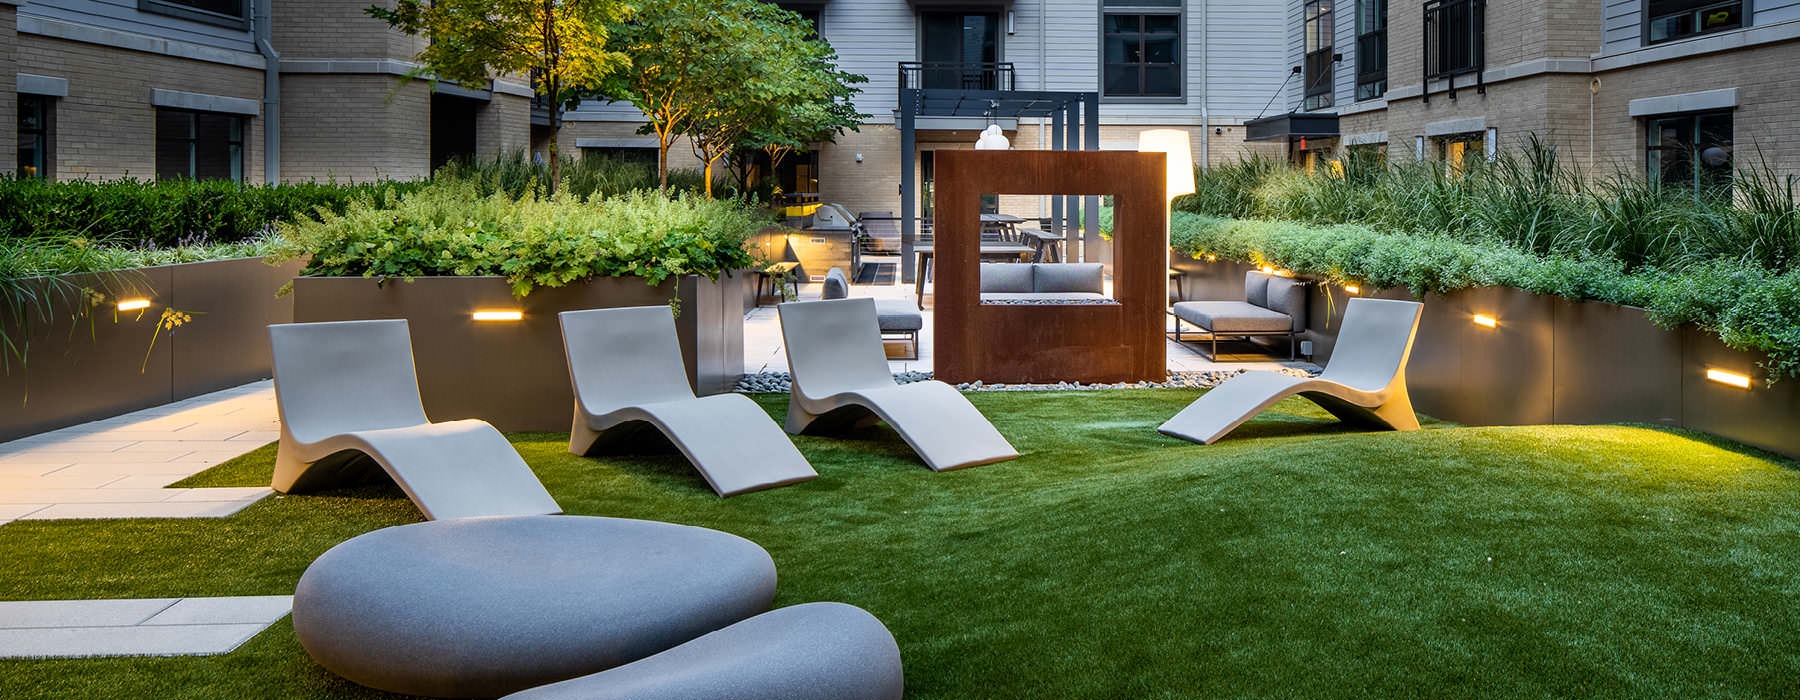 lawn with lounge chairs in courtyard